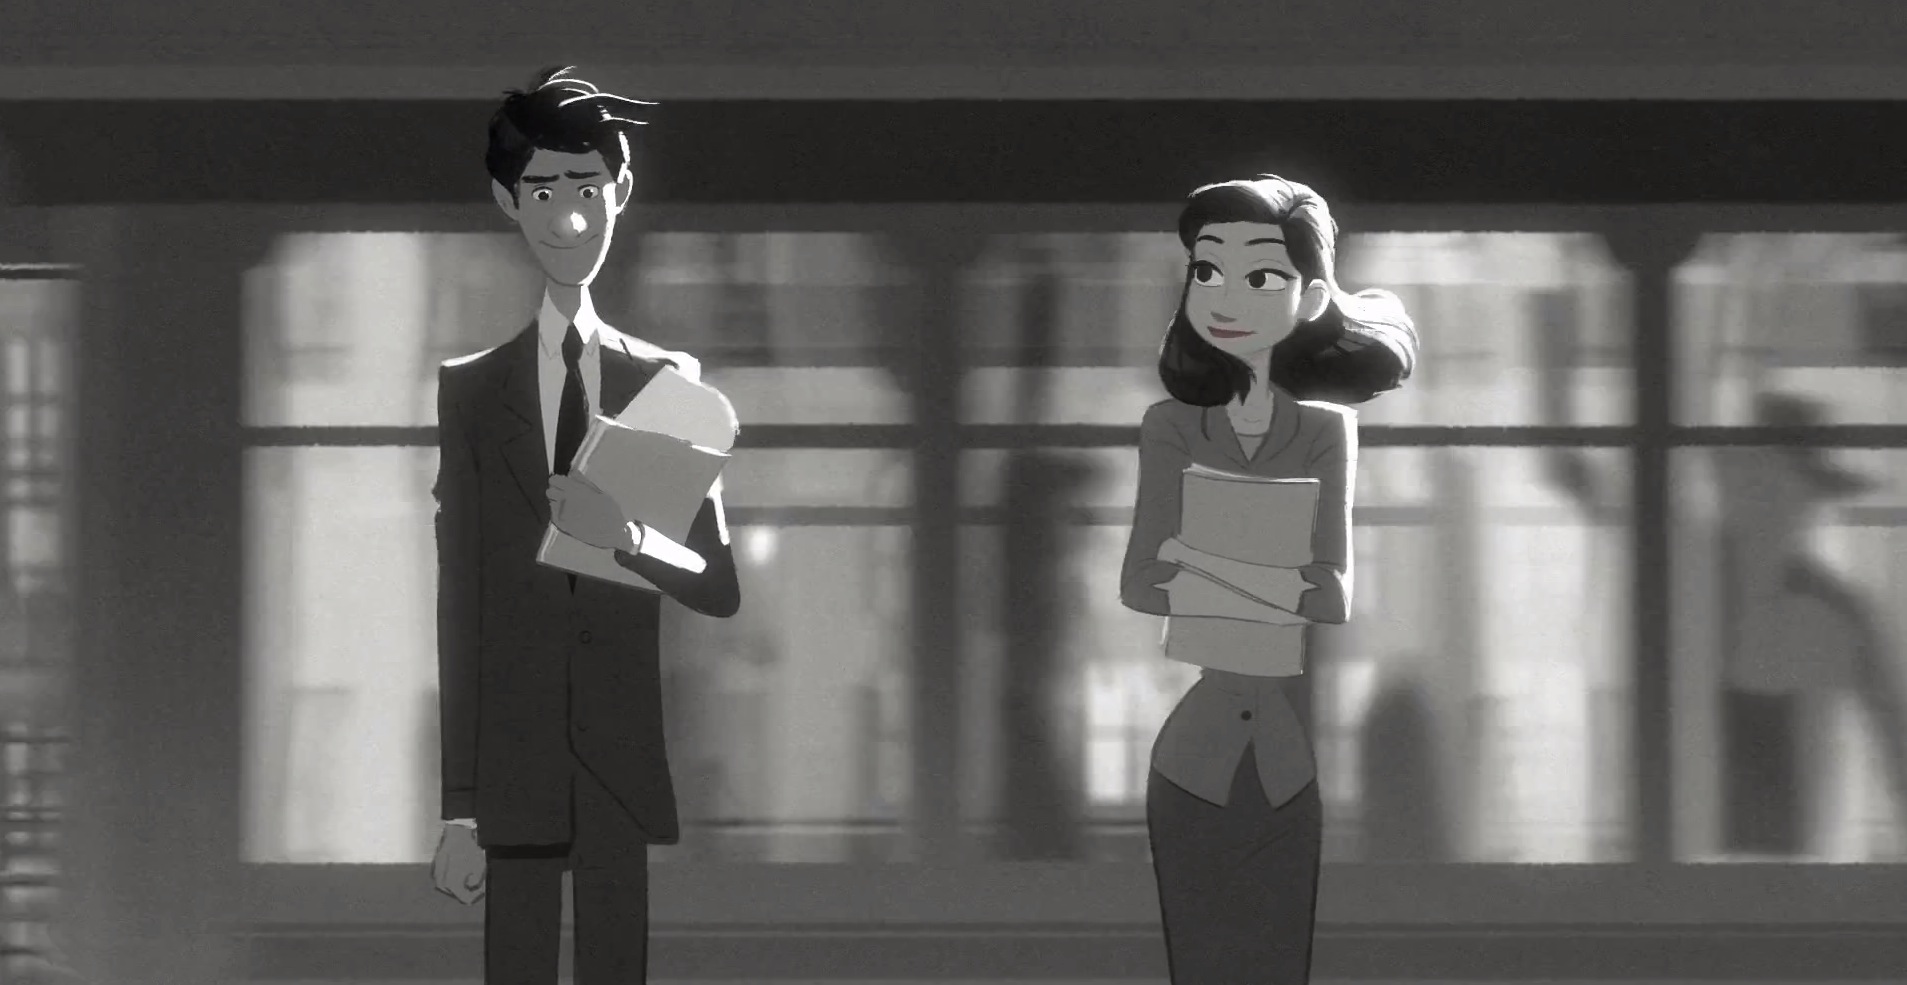 The paperman